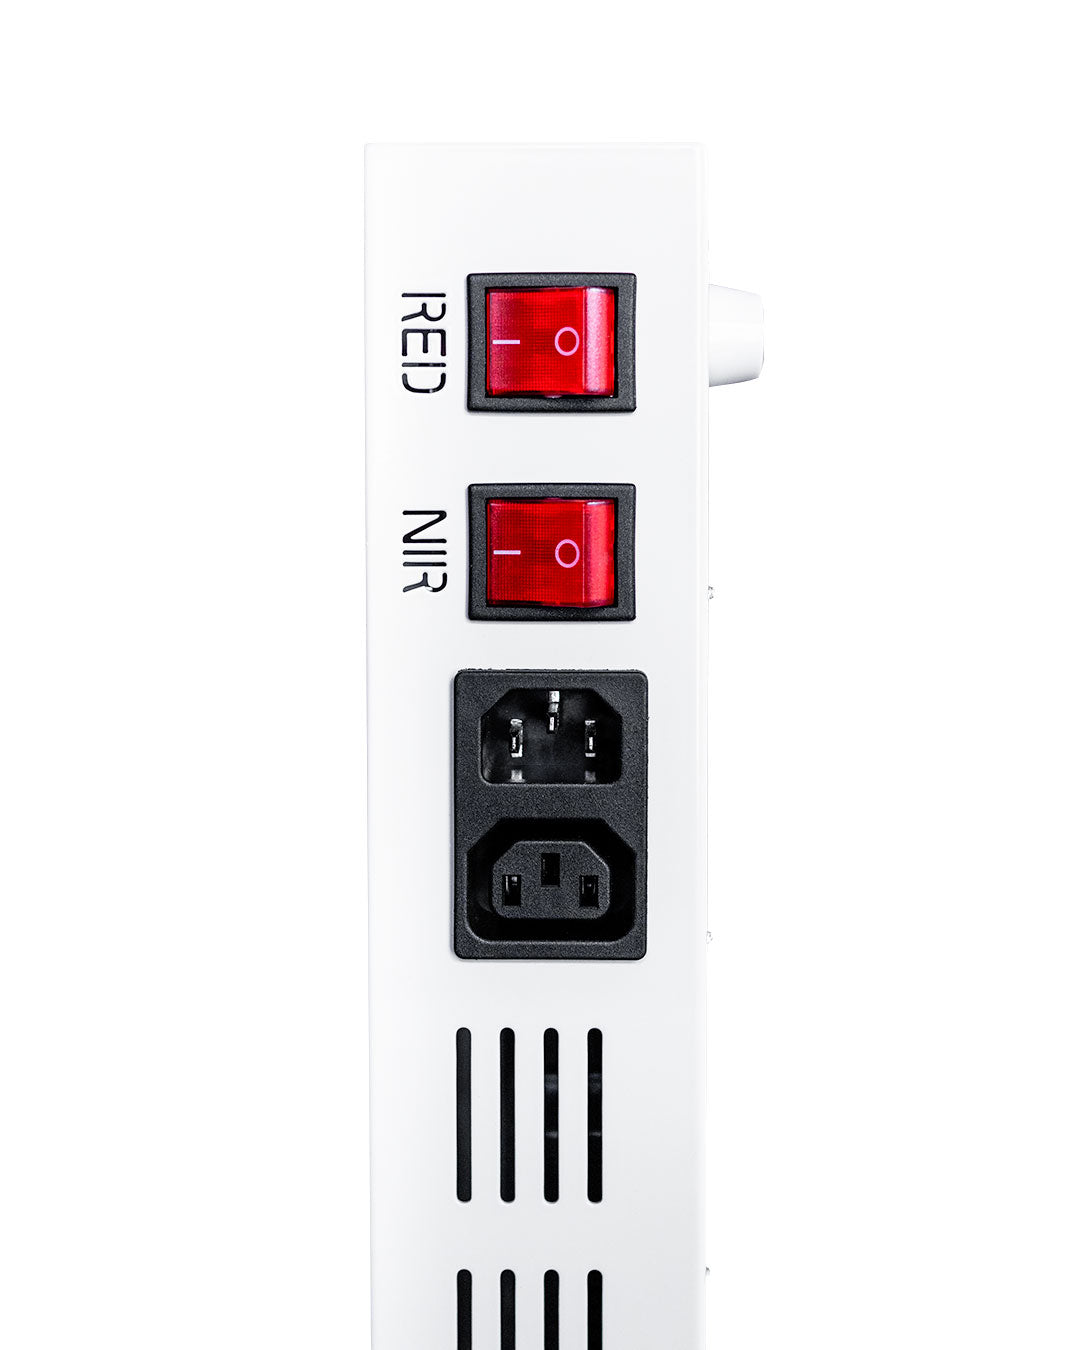 Orion Pro 600 device side-view of the Red and NIR switches. Cutting edge and seamless design featuring the synaptic system. Orion Red Light Therapy.